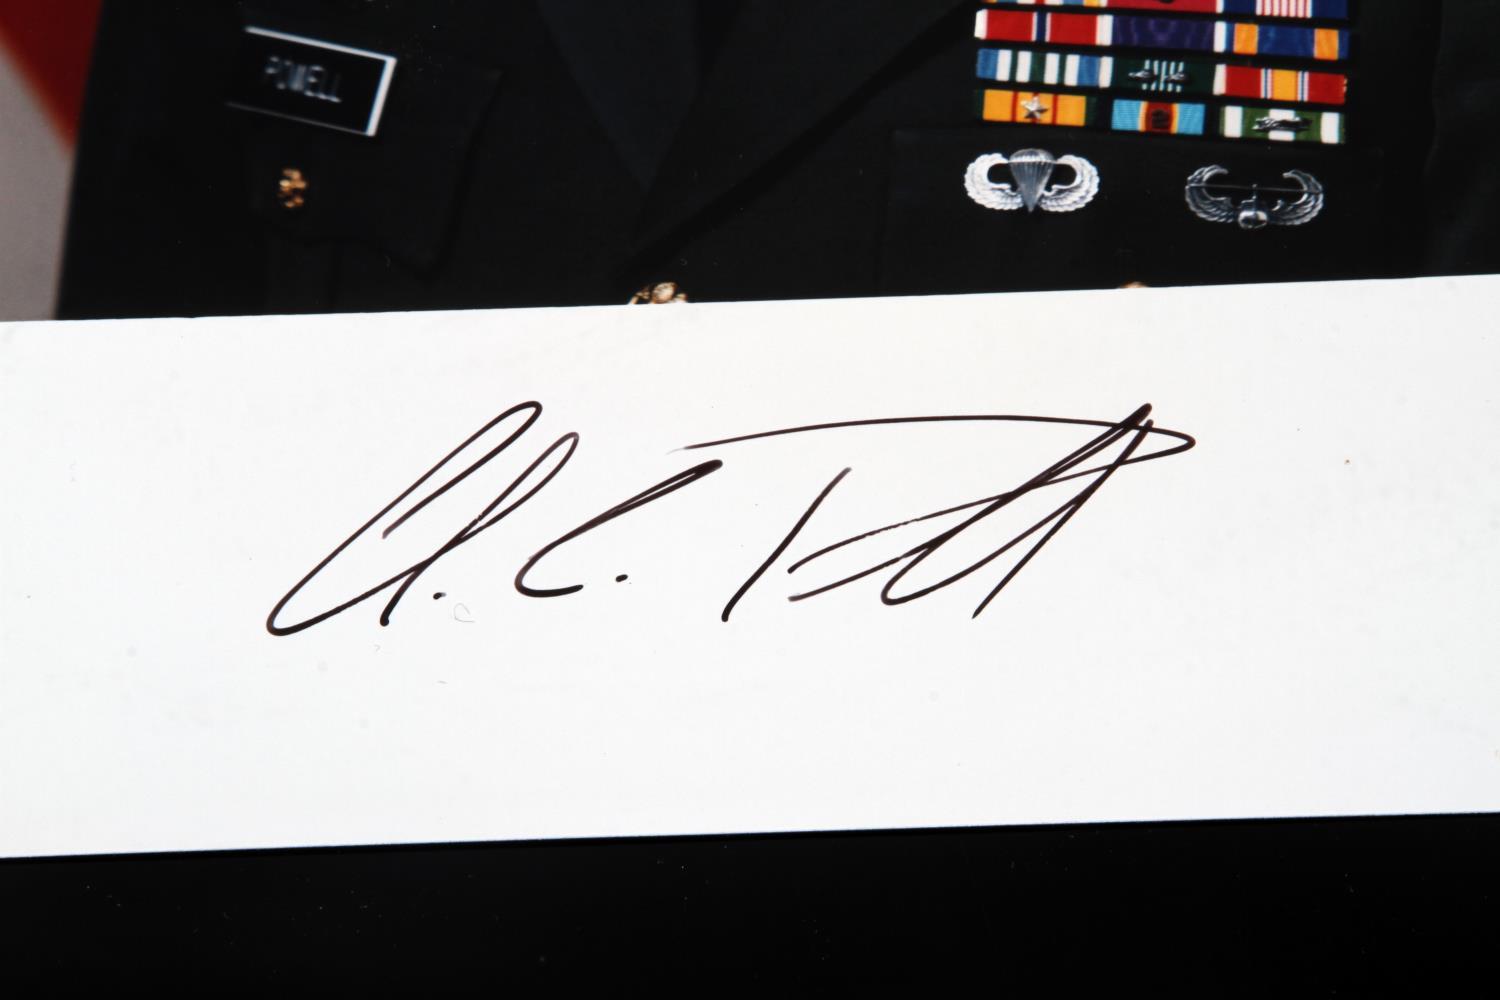 COLIN L POWELL JOINT CHIEFS OF STAFF SIGNED LETTER